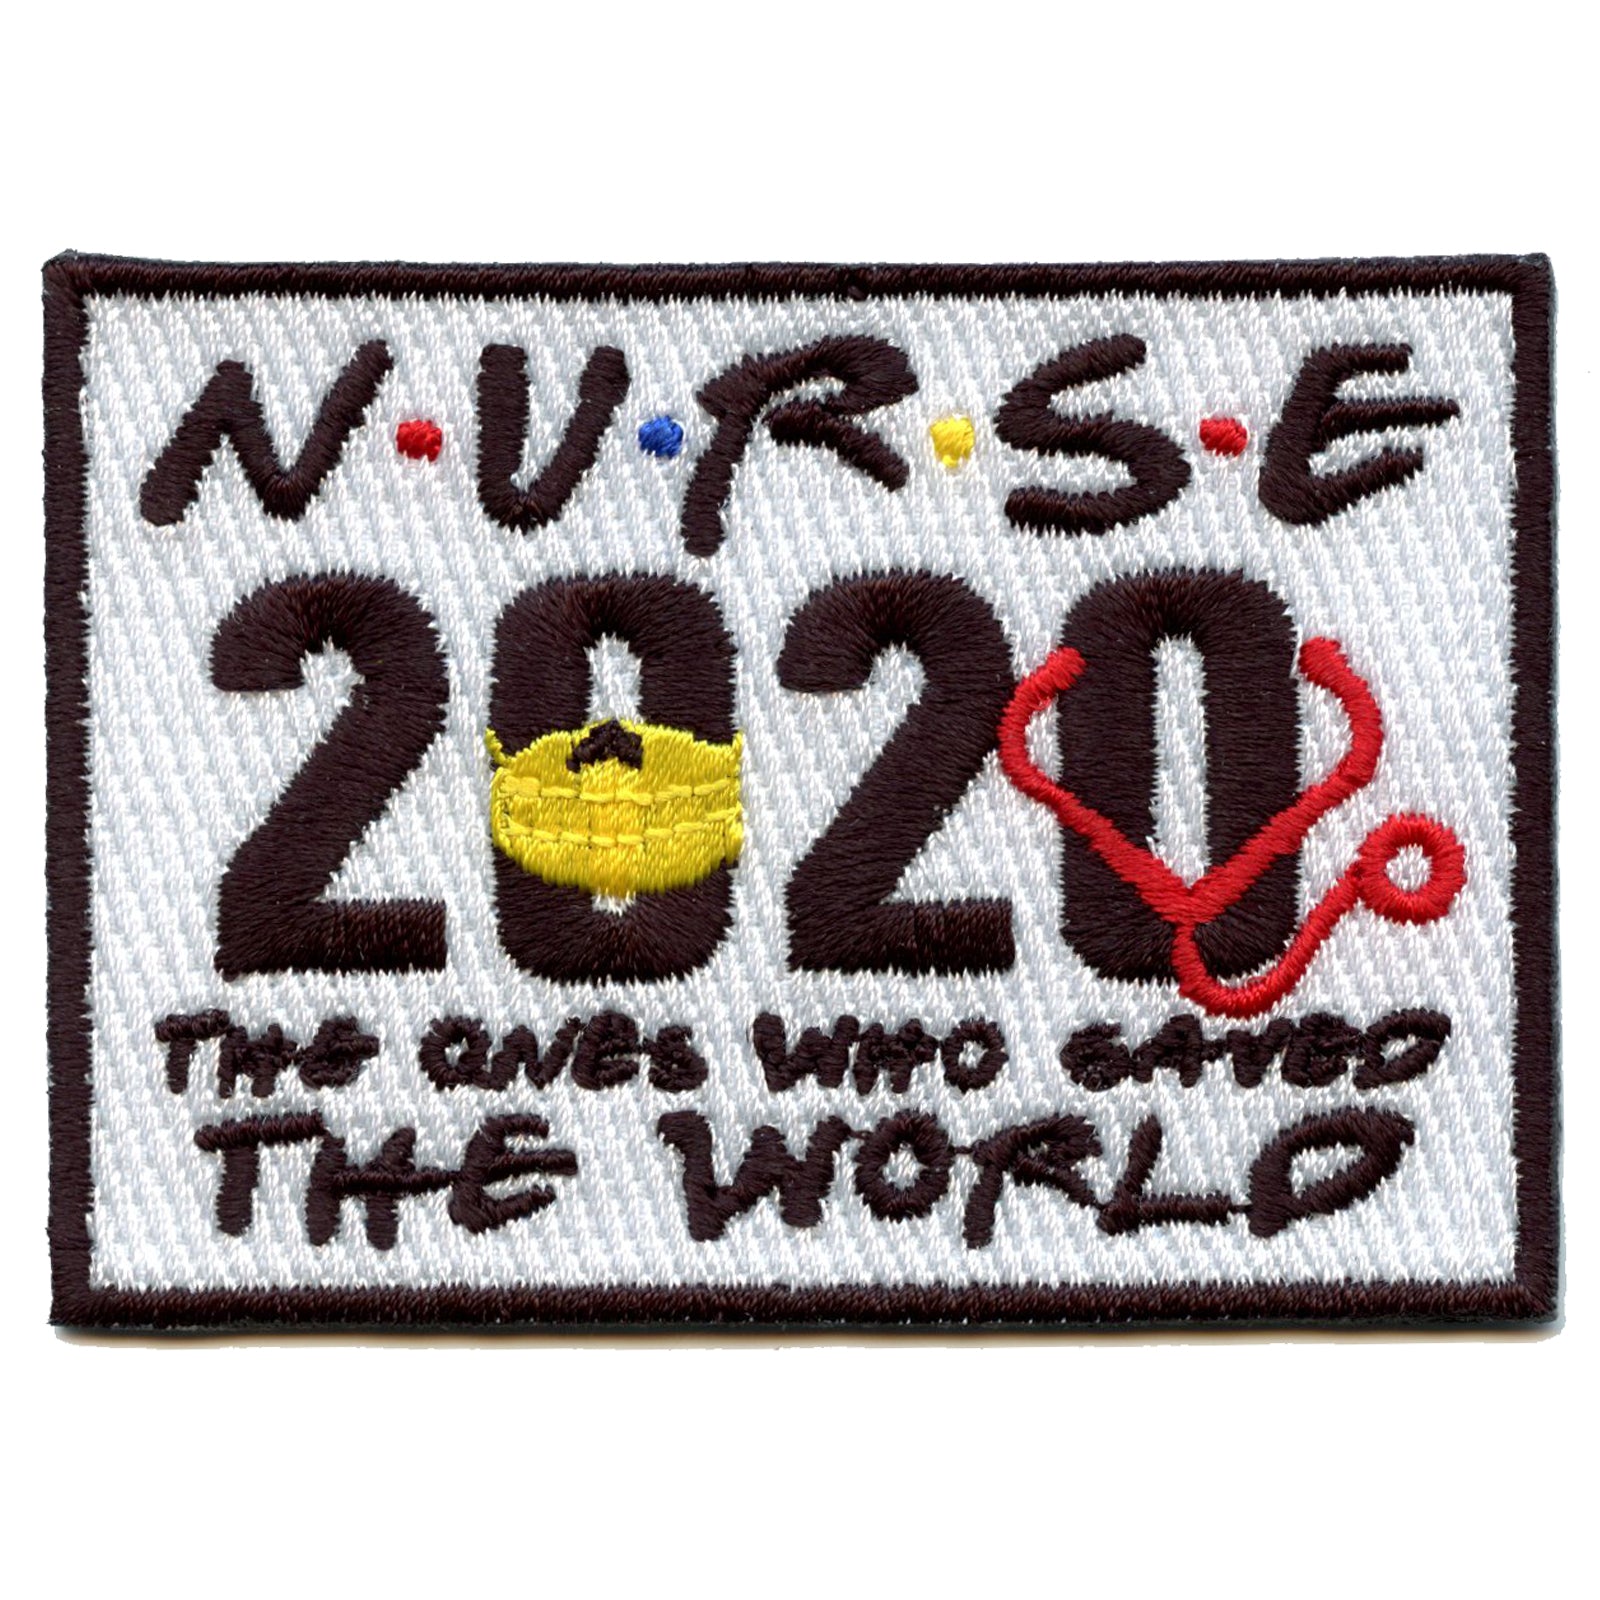 Nurse 2020 "The Ones Who Saved The World" Embroidered Iron On Patch 